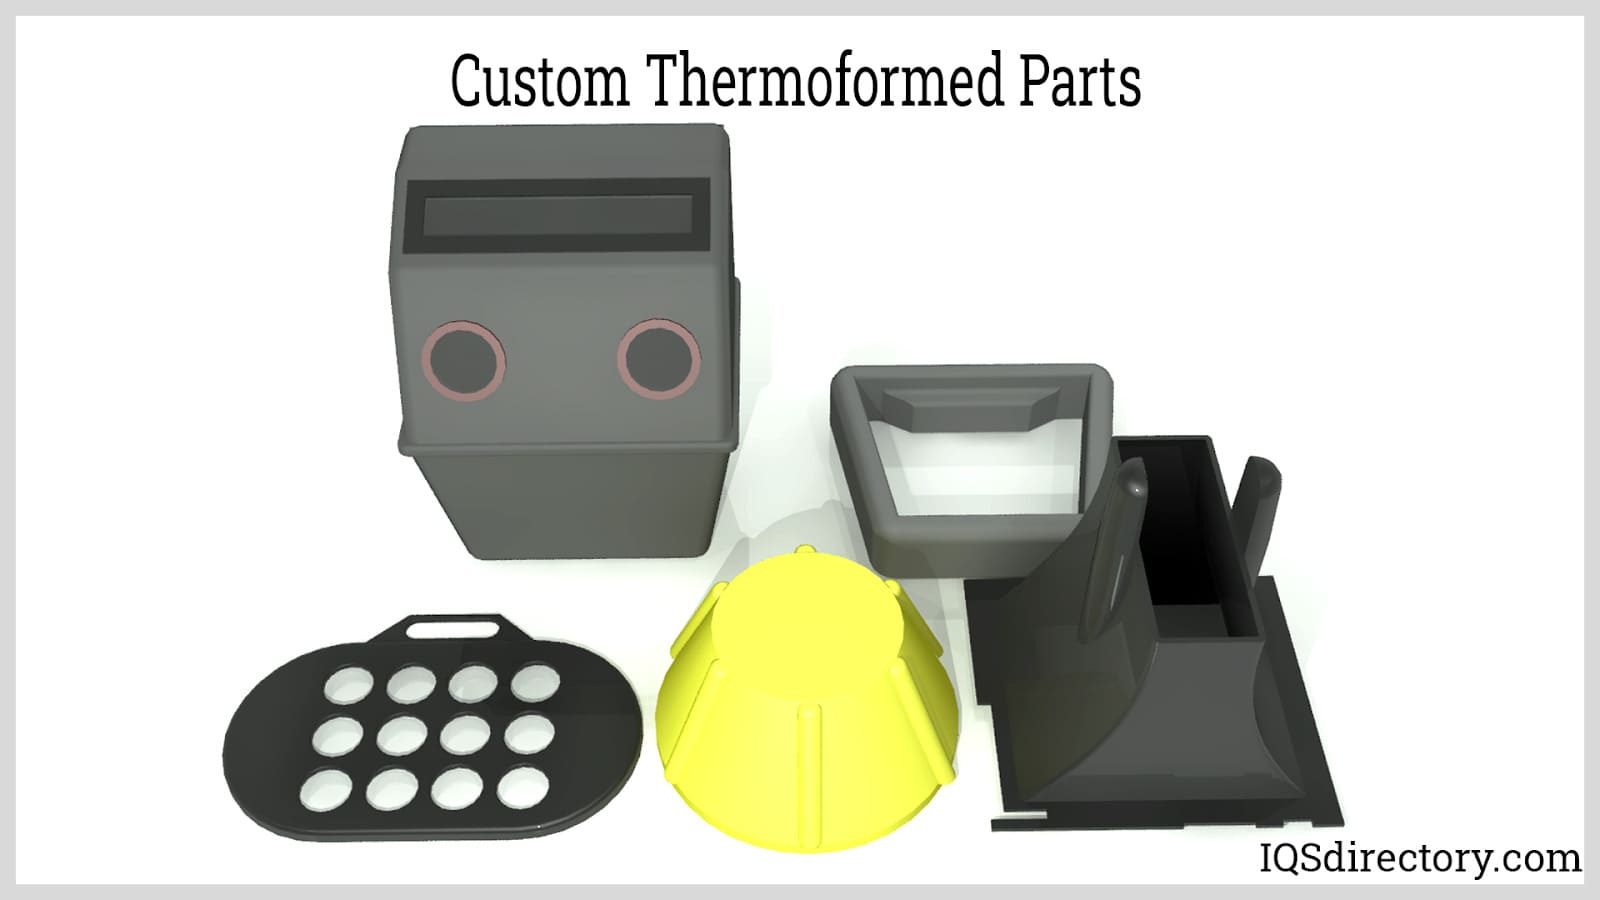 Custom Thermoformed Parts